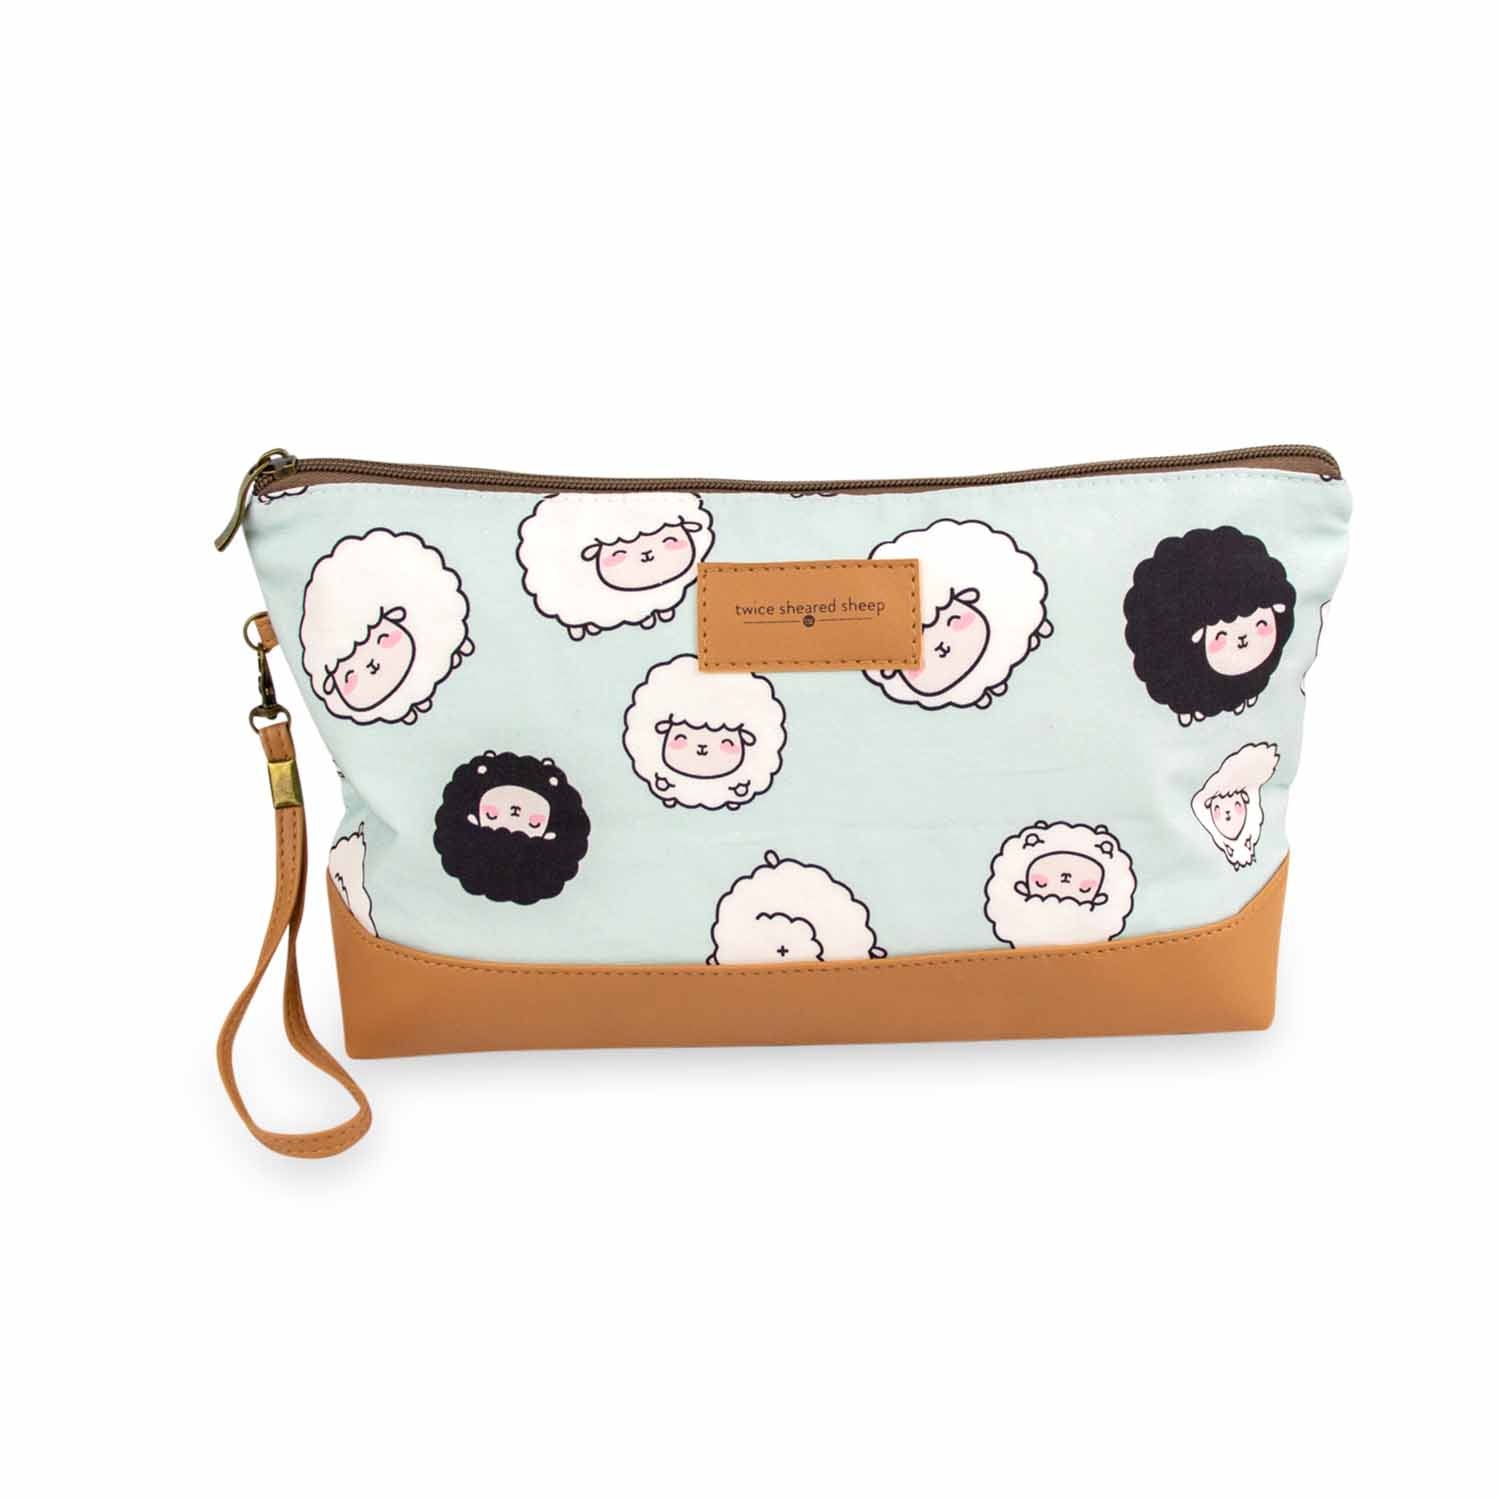 PRE-ORDER - Chubby Sheep Trinity Bag – Small Zippered Knitting Project Bag – Seafoam - Shipping In Early June